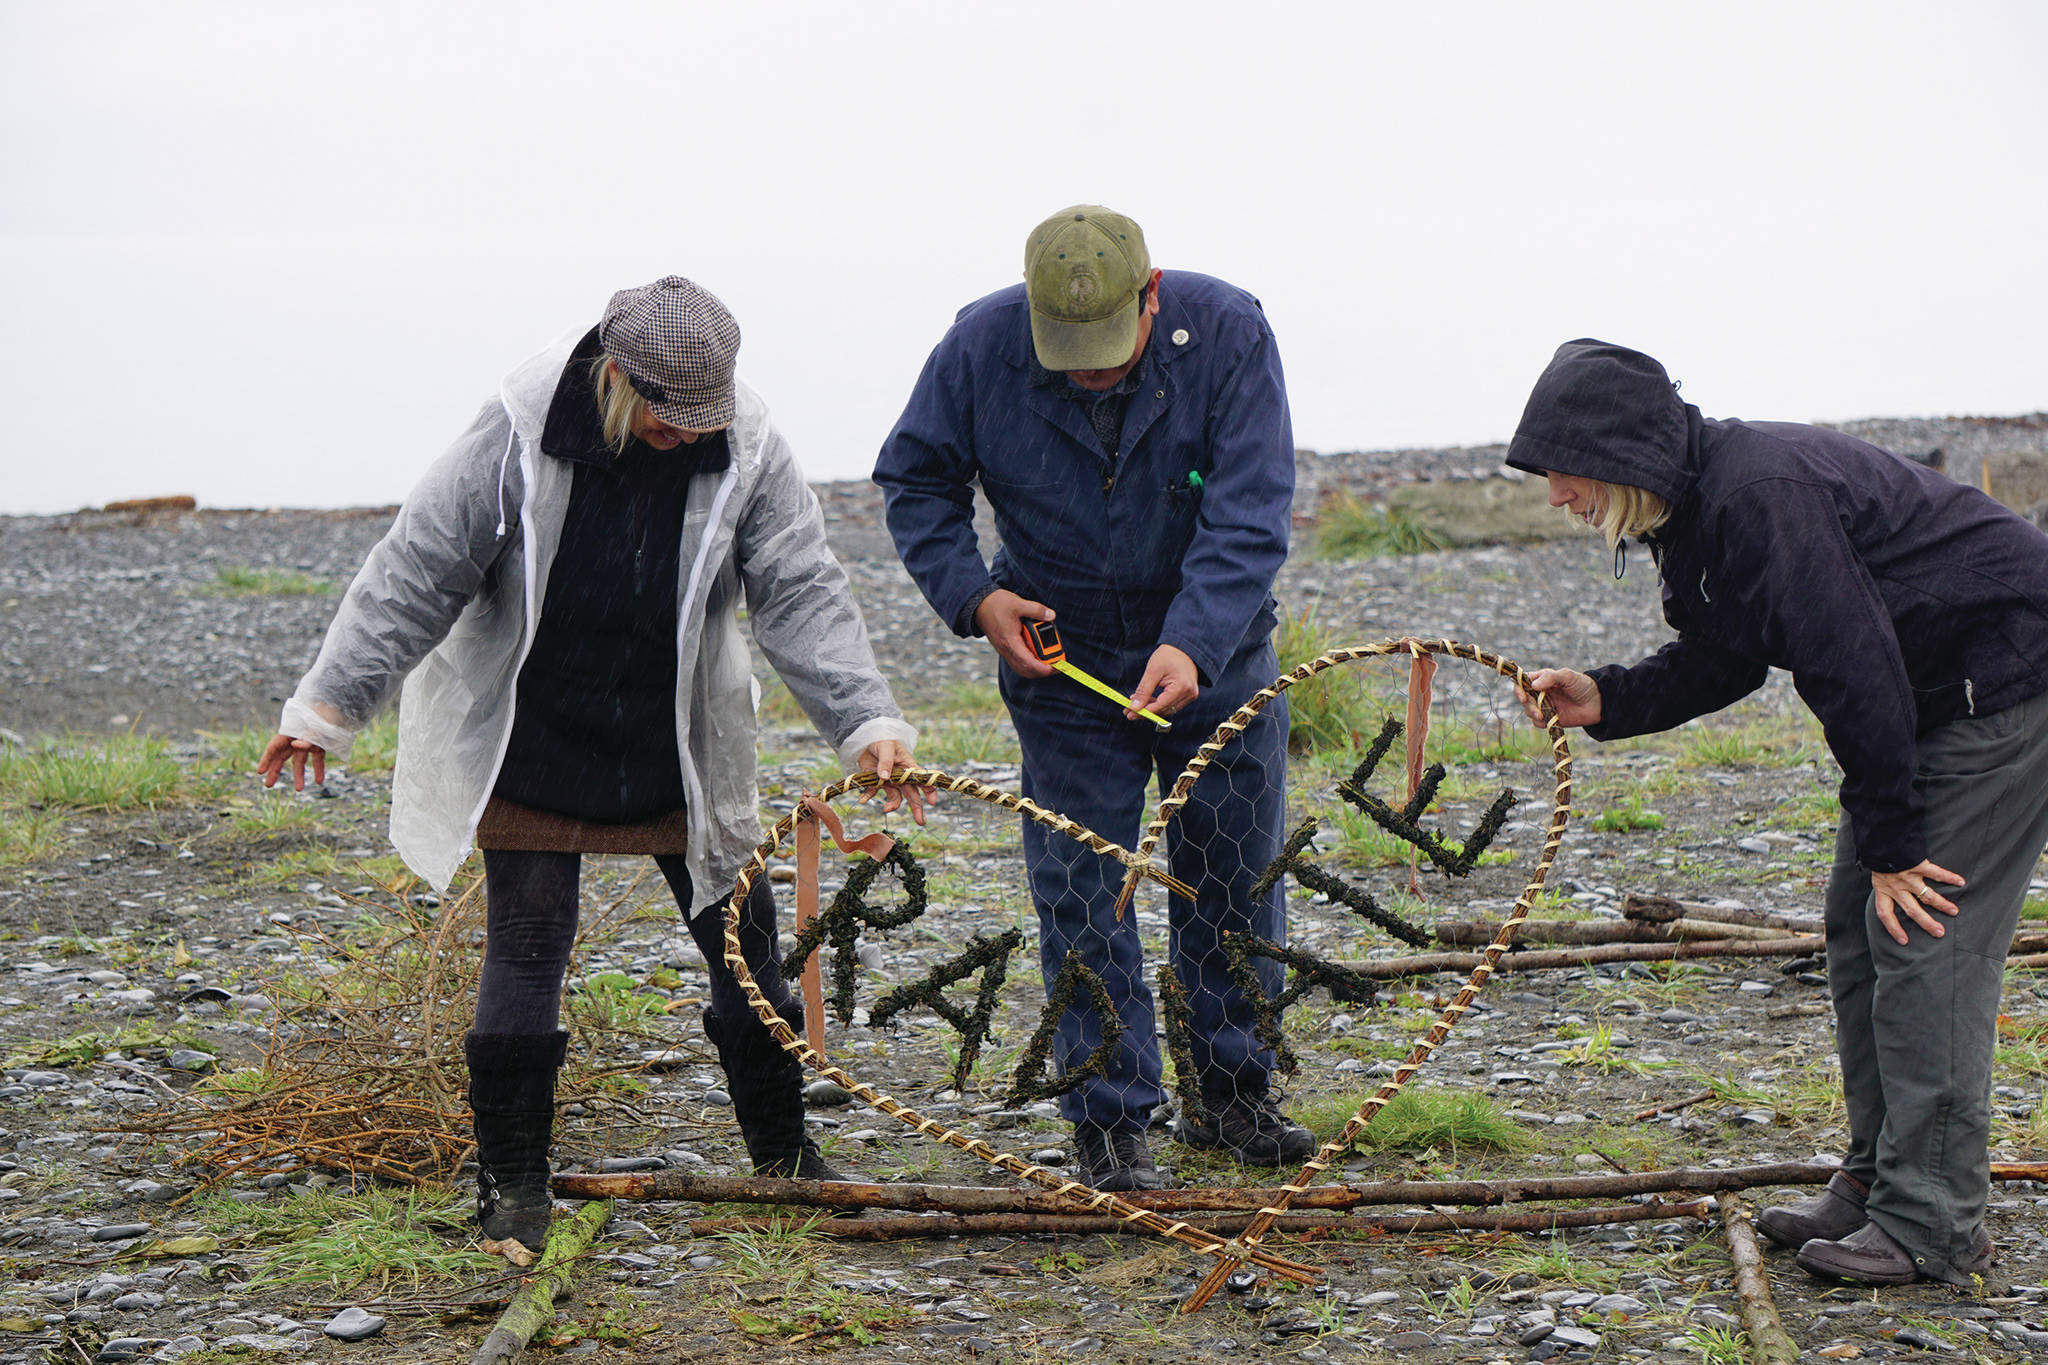 Burning Basket facilitator Mavis Muller, left, works on the sign for the 16th annual Burning Basket, Radiate, on Monday, Sept. 9, 2019, at Mariner Park on the Homer Spit in Homer, Alaska. Helping her are Charles Aguilar, center, and Patty Delate, right. (Photo by Michael Armstrong/Homer News)